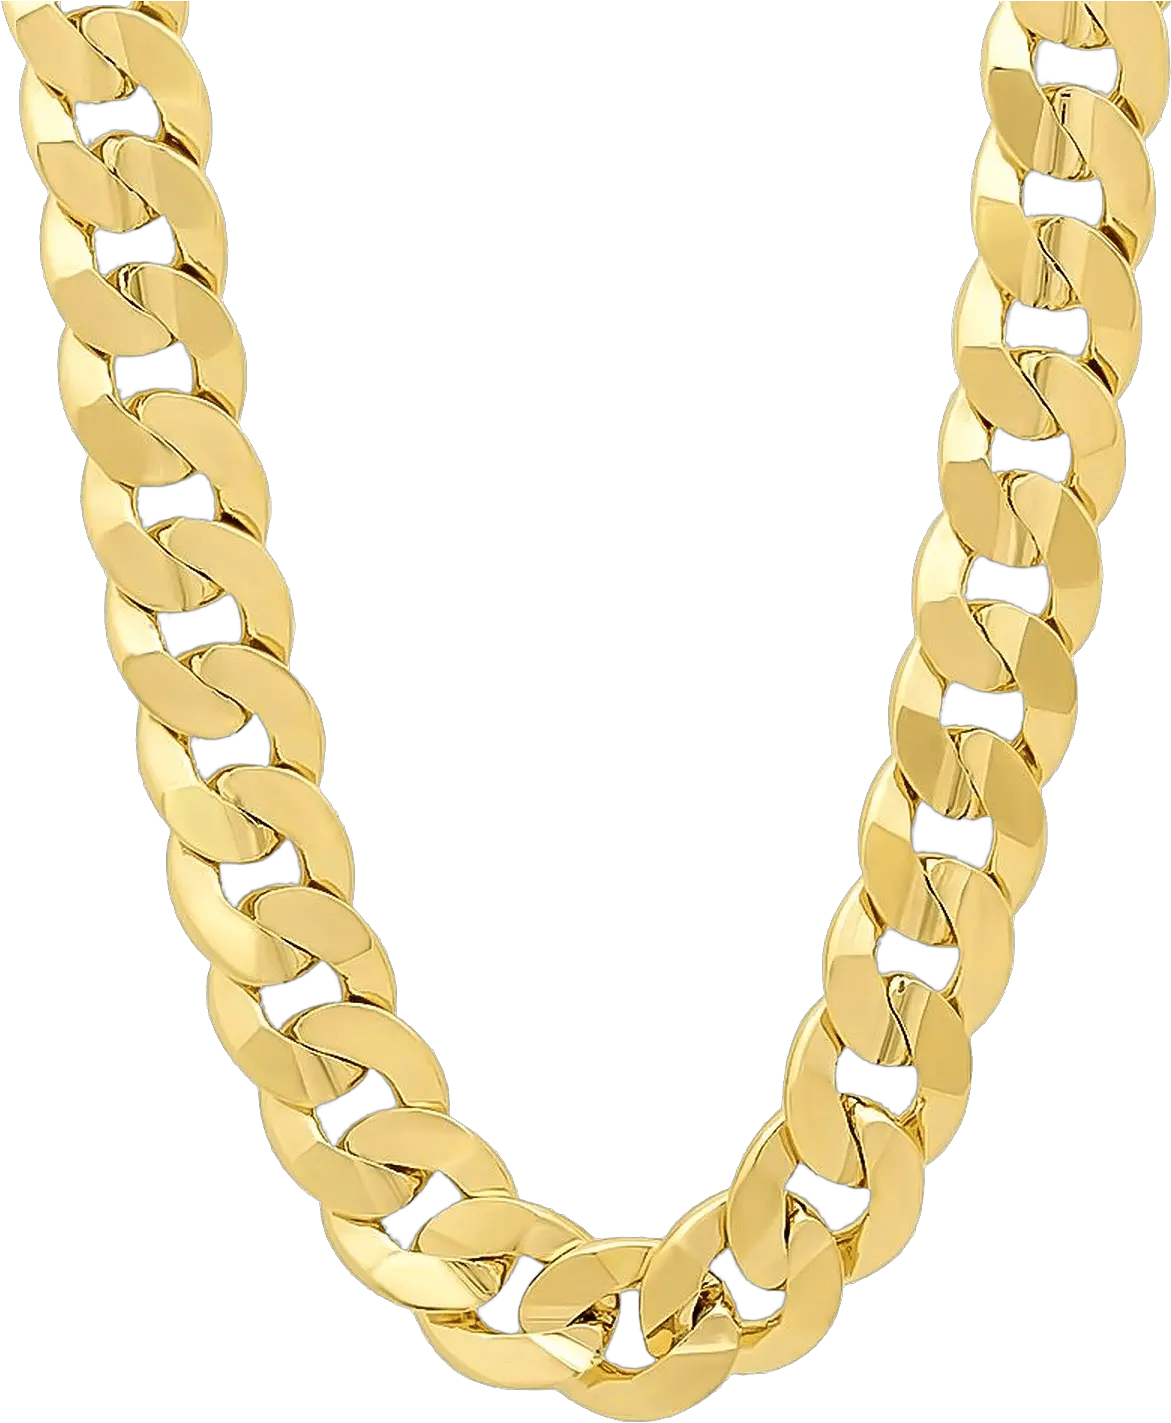 White Chain Png